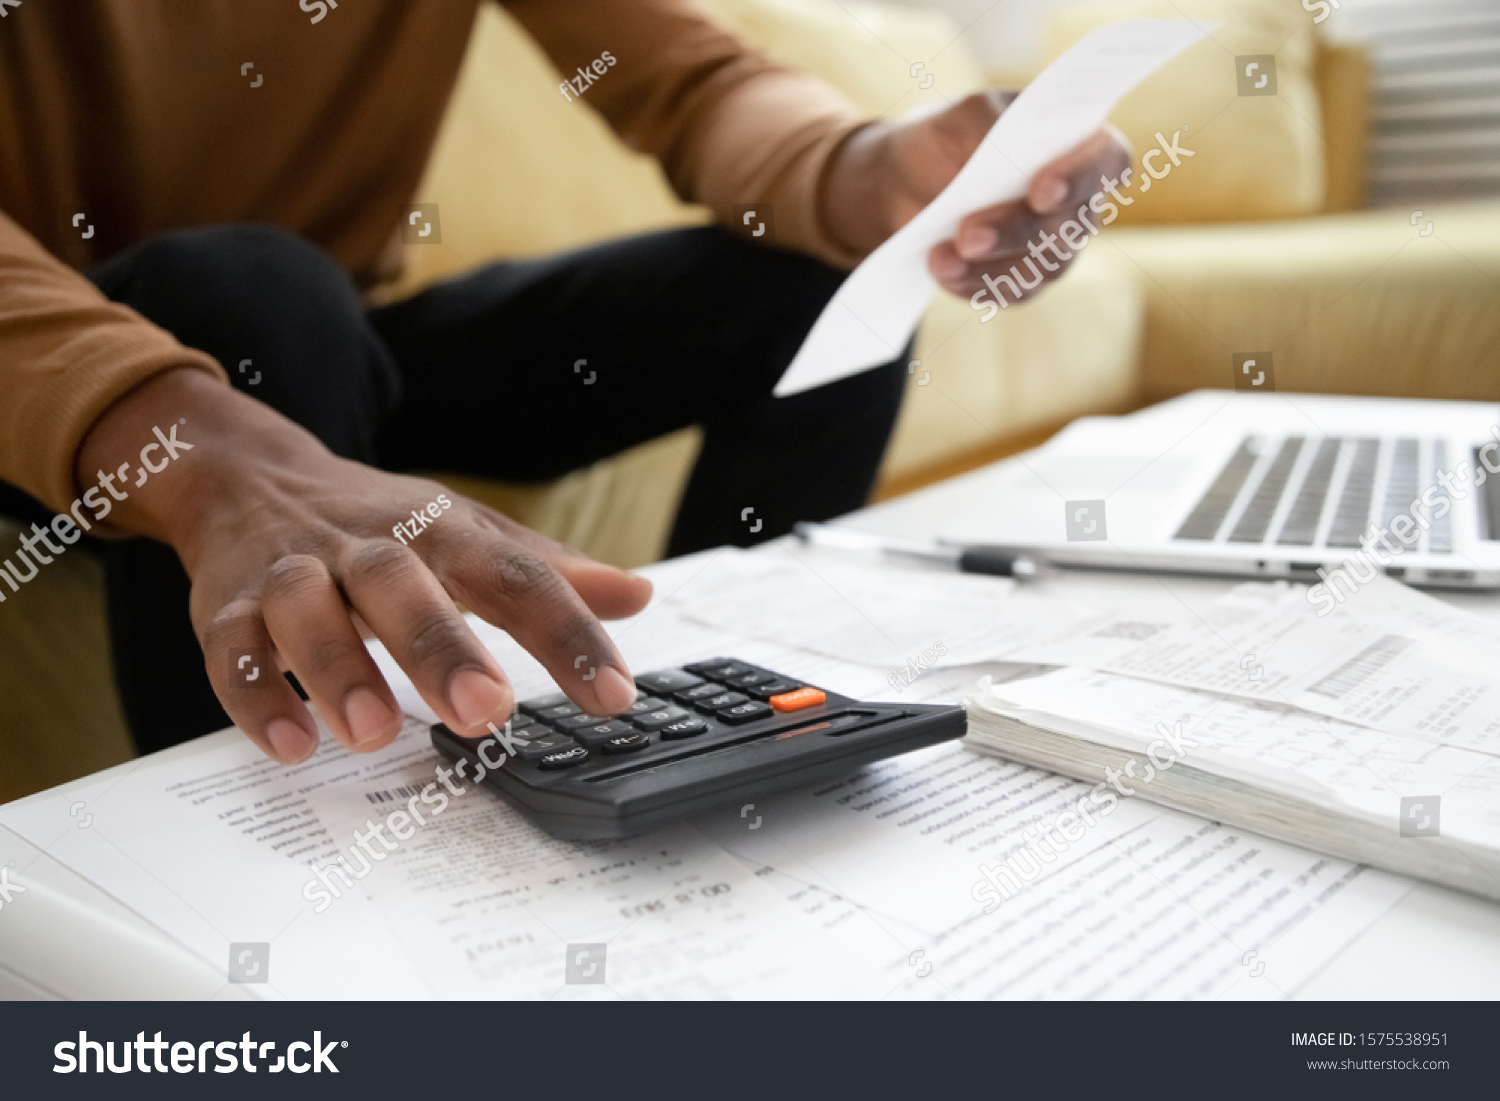 Close up of african American man calculating using machine managing household finances at home, focused biracial male make calculations on calculator paying bills, account taxes or expenses #1575538951